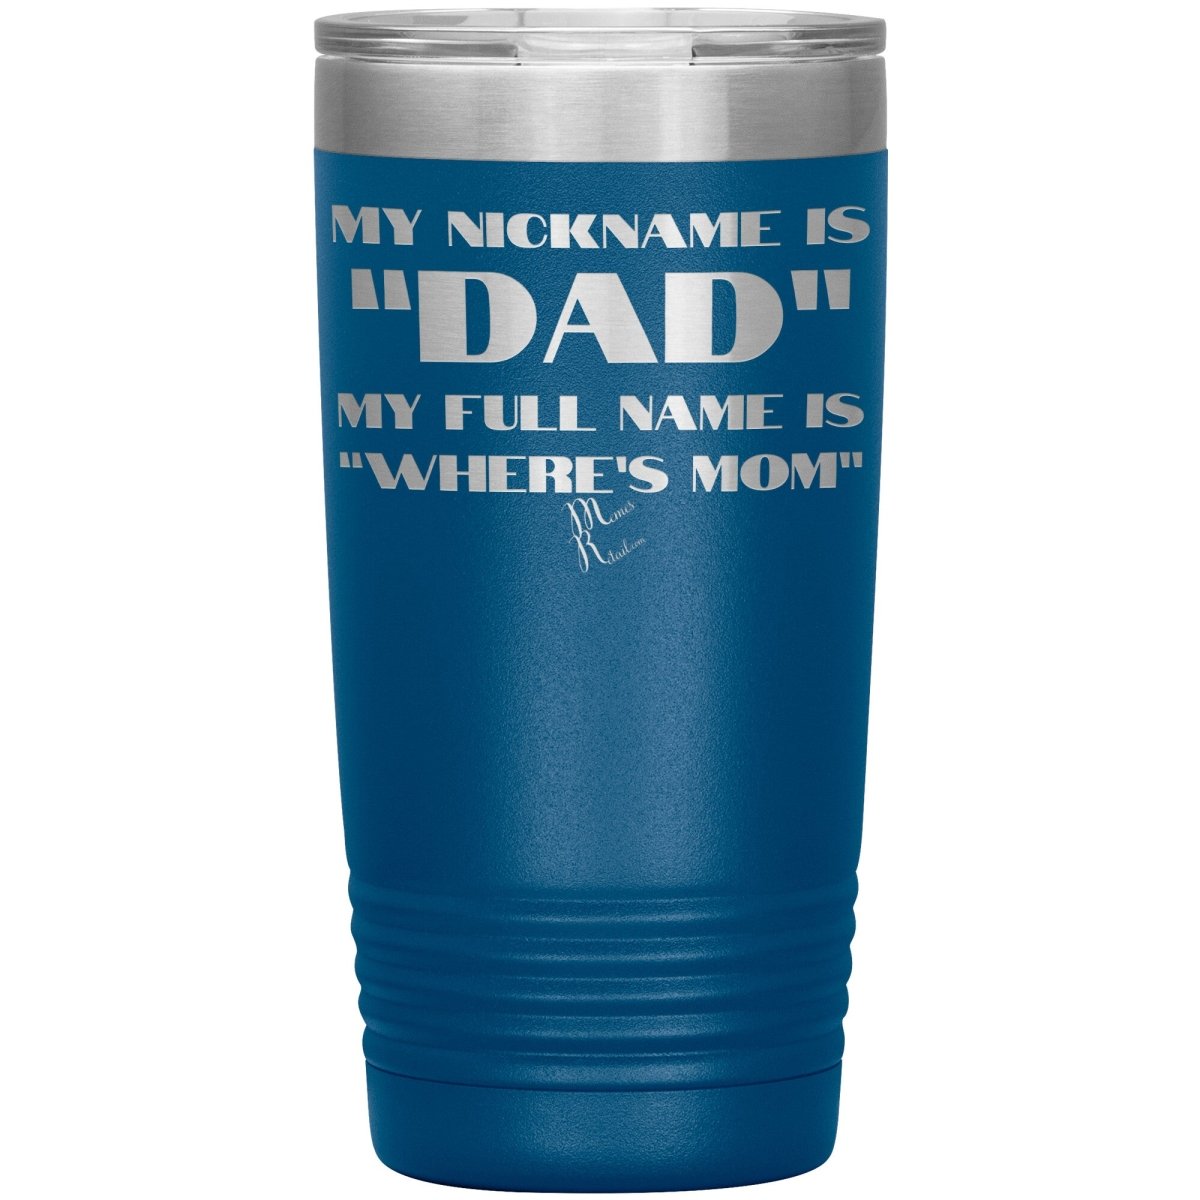 My Nickname is "Dad", My Full Name is "Where's Mom" Tumblers, 20oz Insulated Tumbler / Blue - MemesRetail.com